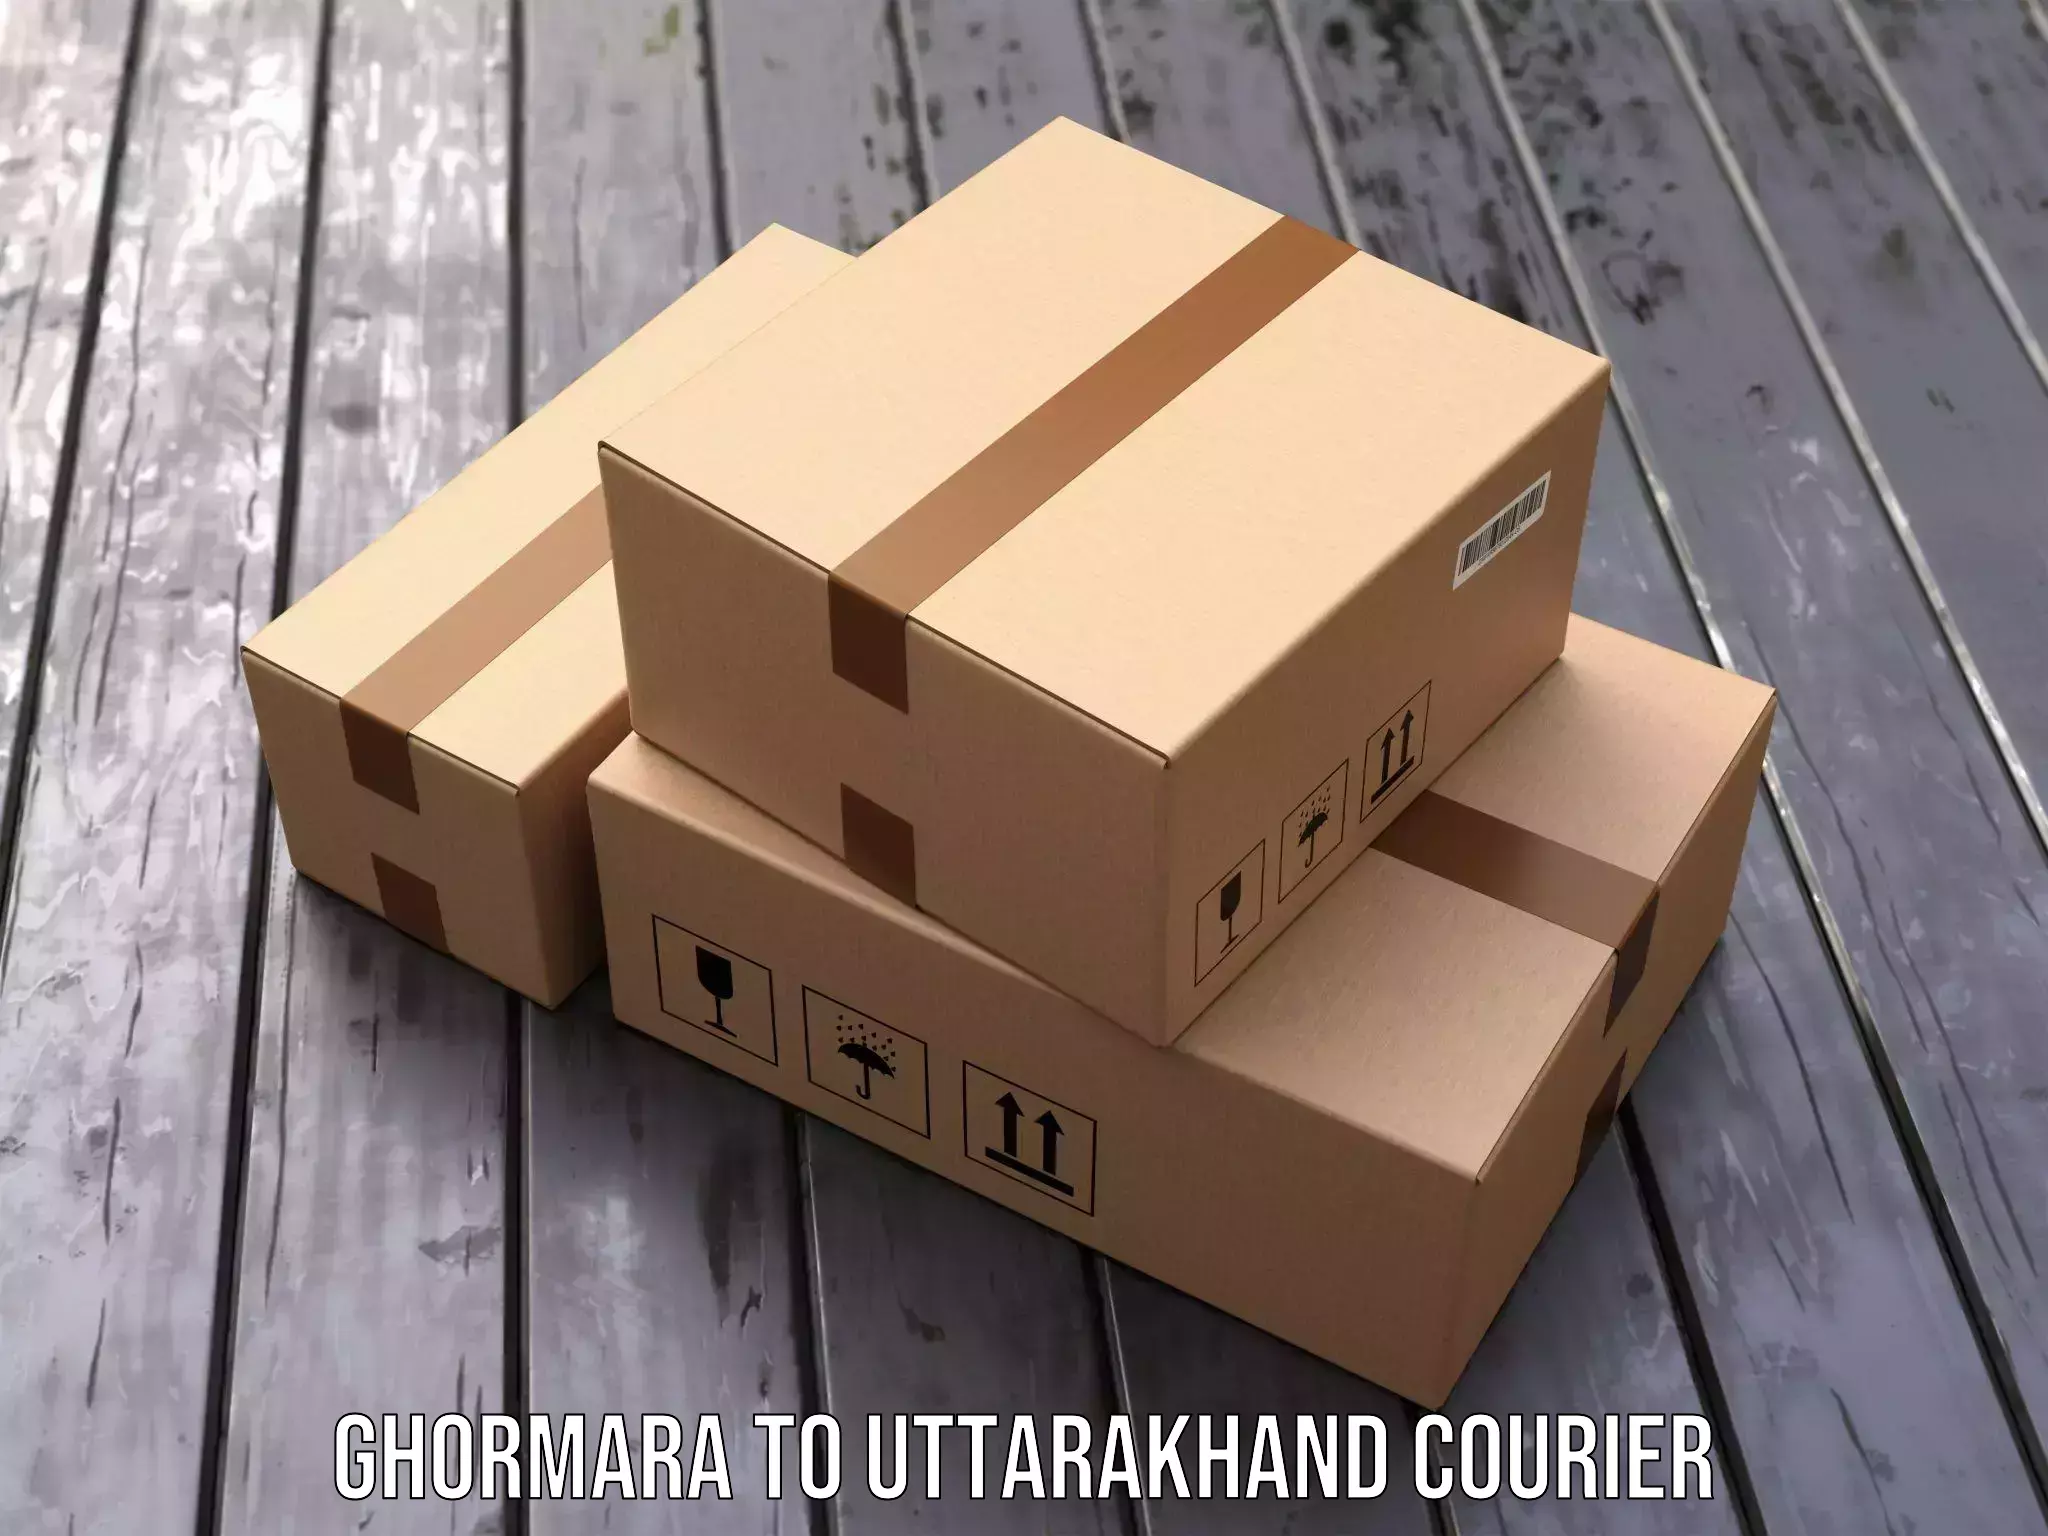 Global shipping networks Ghormara to Mussoorie